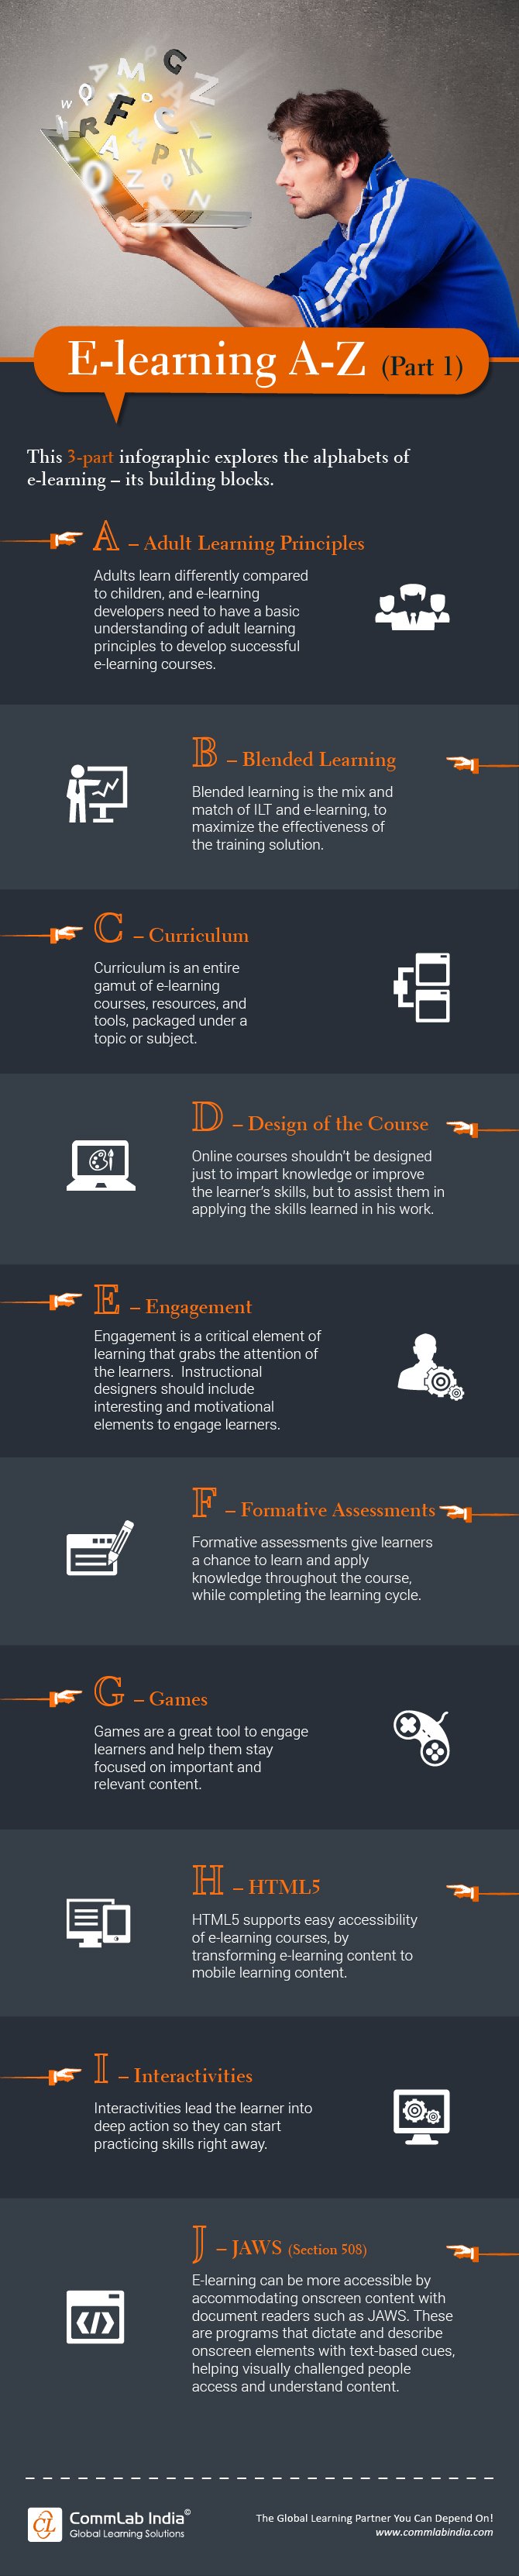 E-learning A-Z Terms: Part 1 [Infographic]